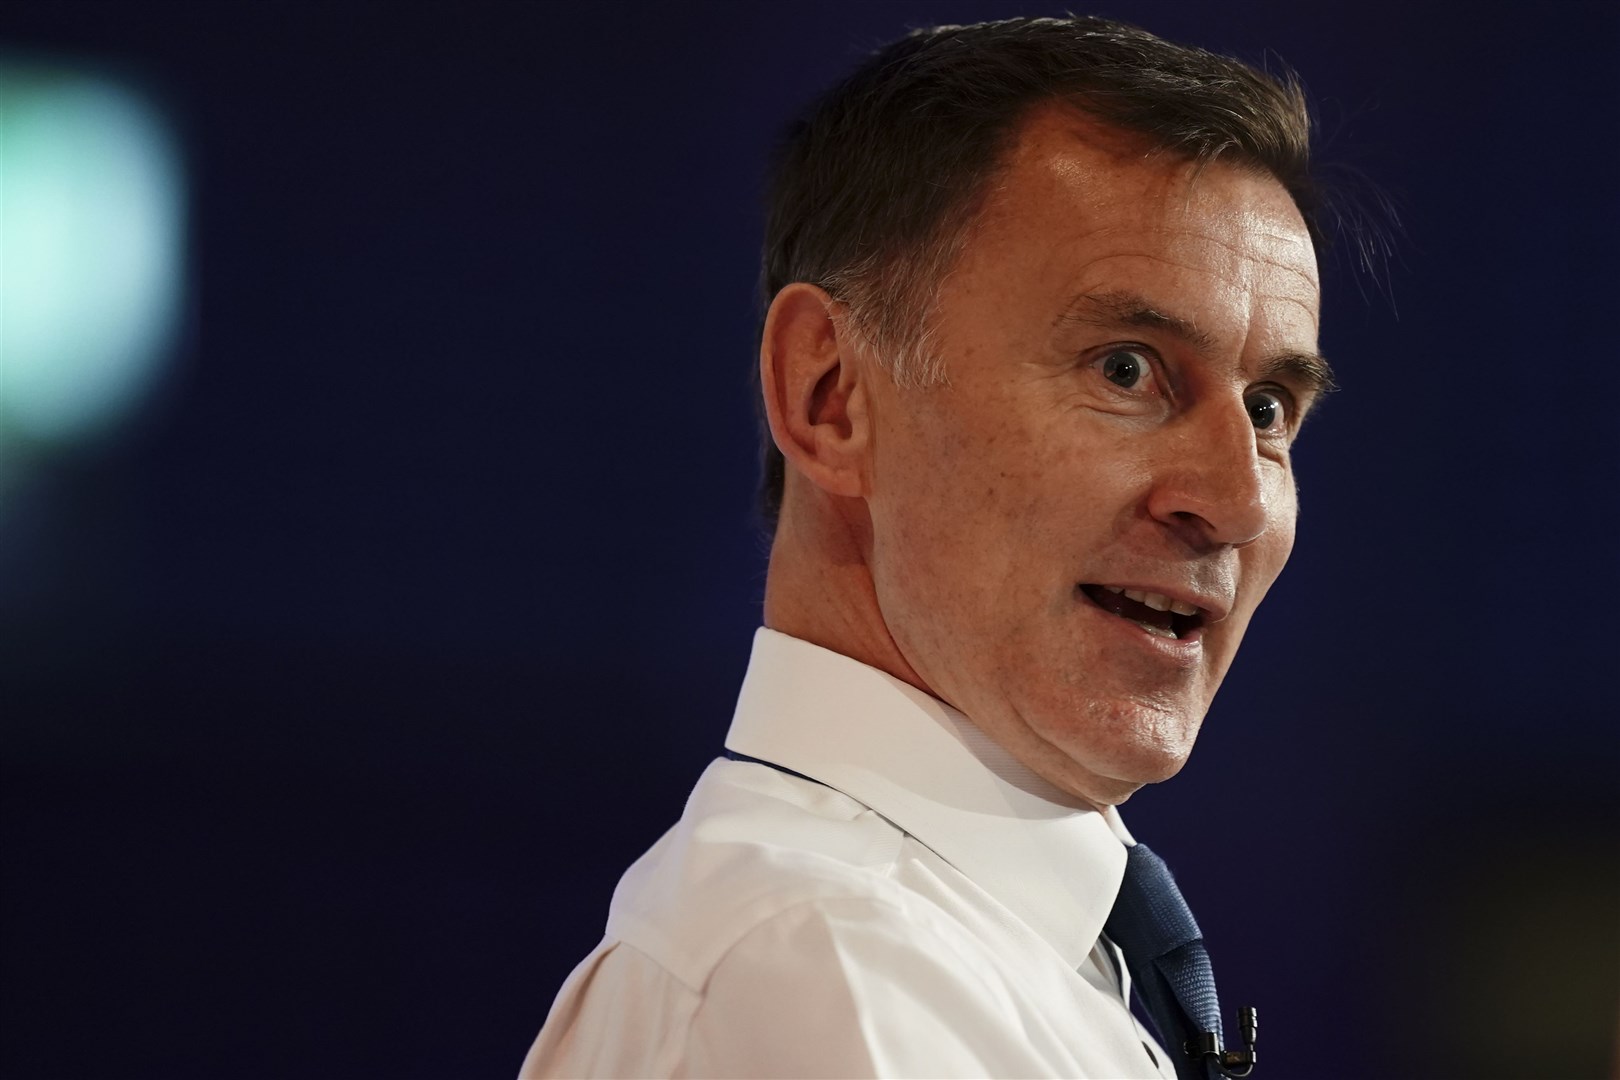 Chancellor of the Exchequer Jeremy Hunt will also give evidence to the inquiry (Jordan Pettitt/PA)